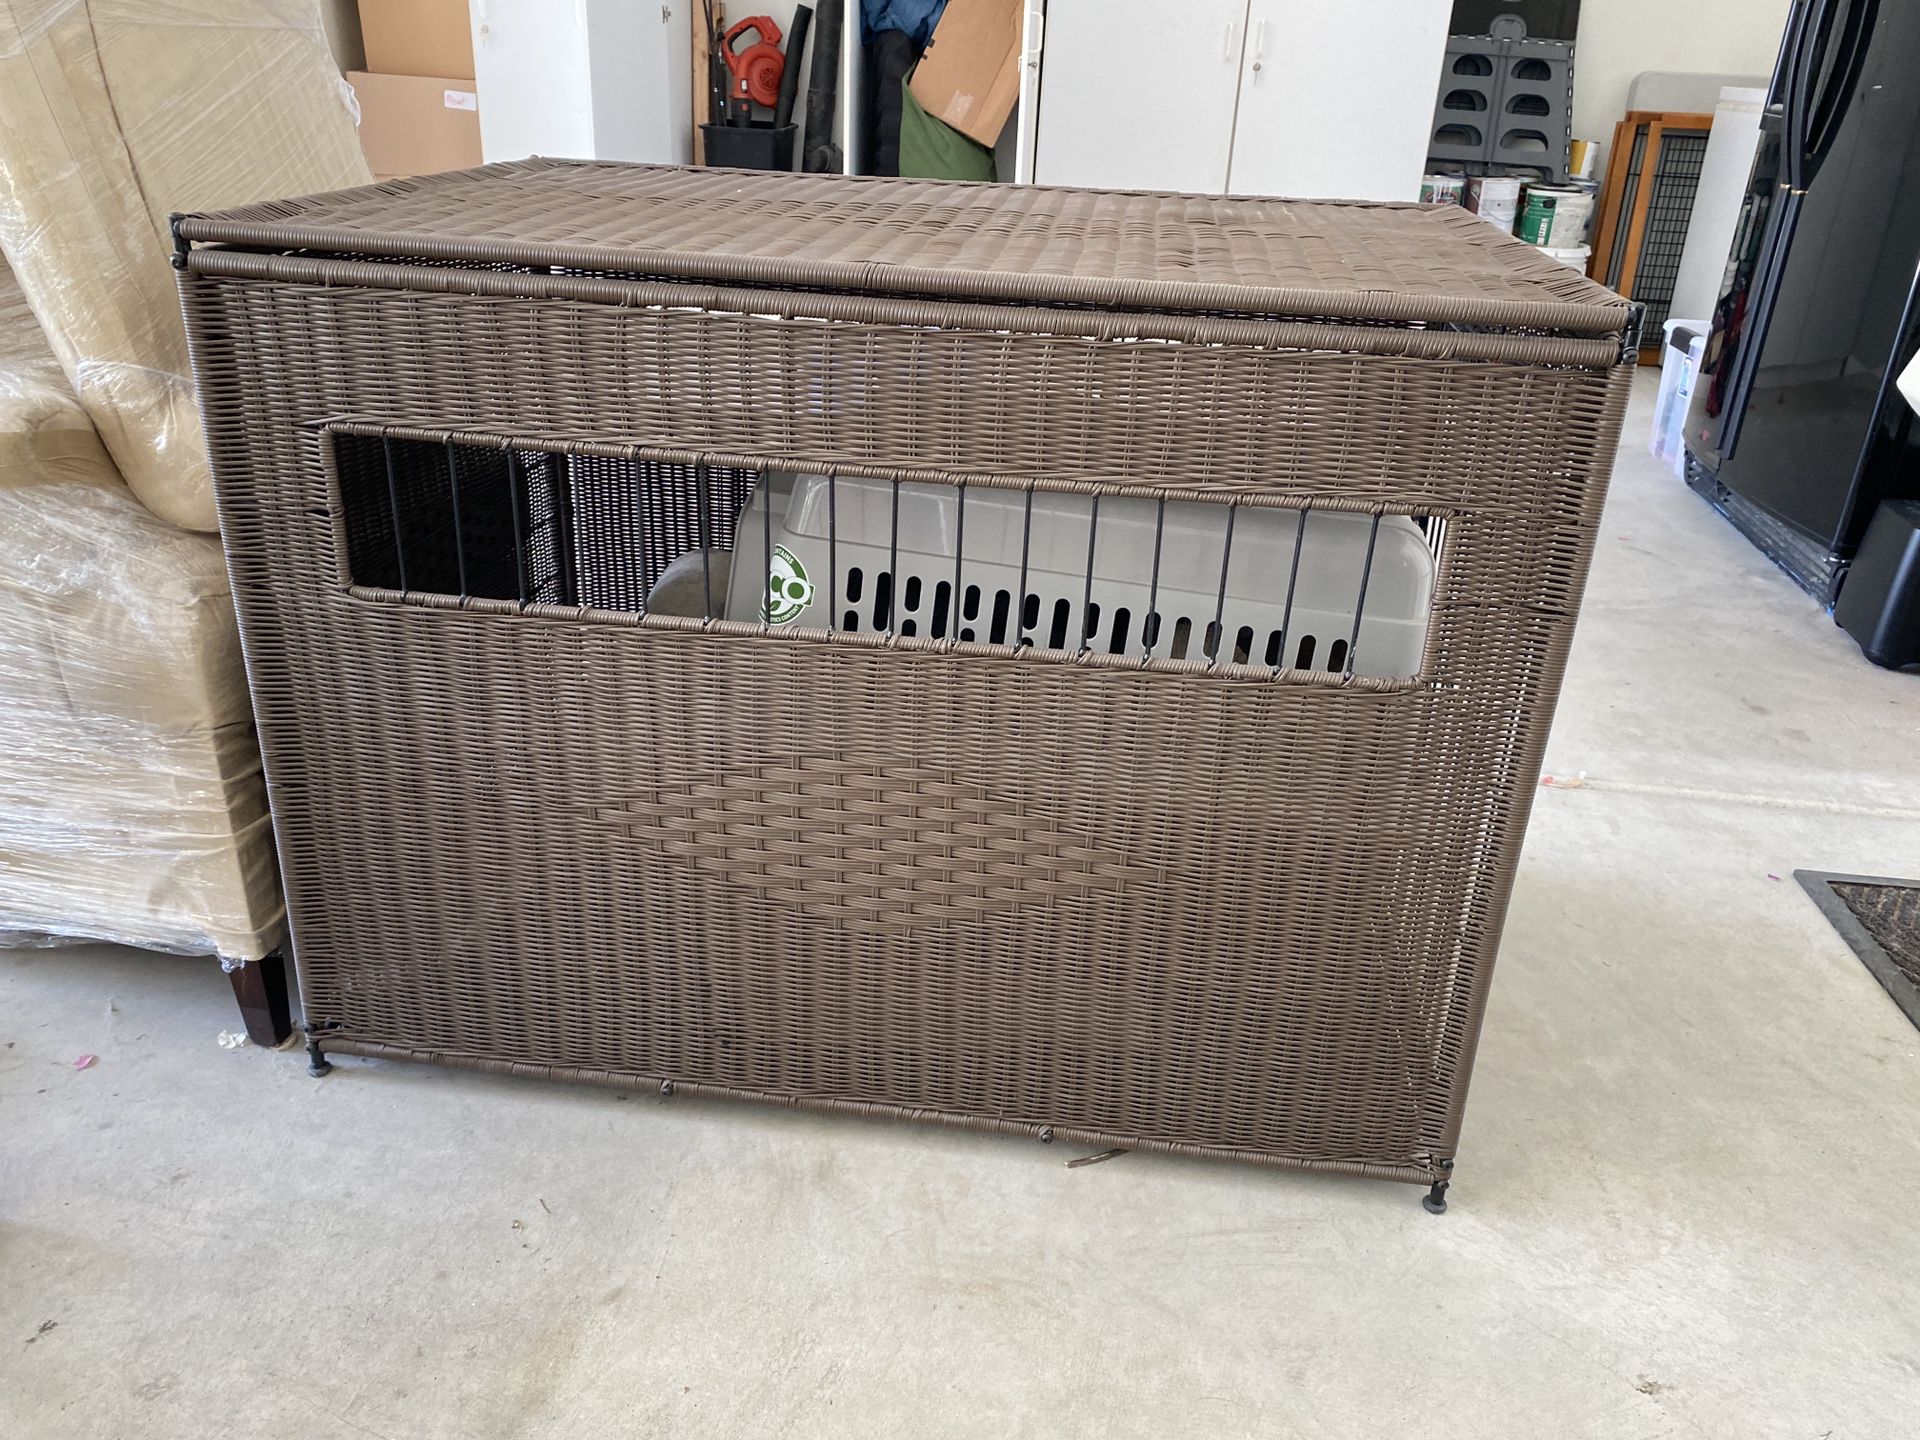 XL Wicker Dog Crate ( $175) - Great Price For These!